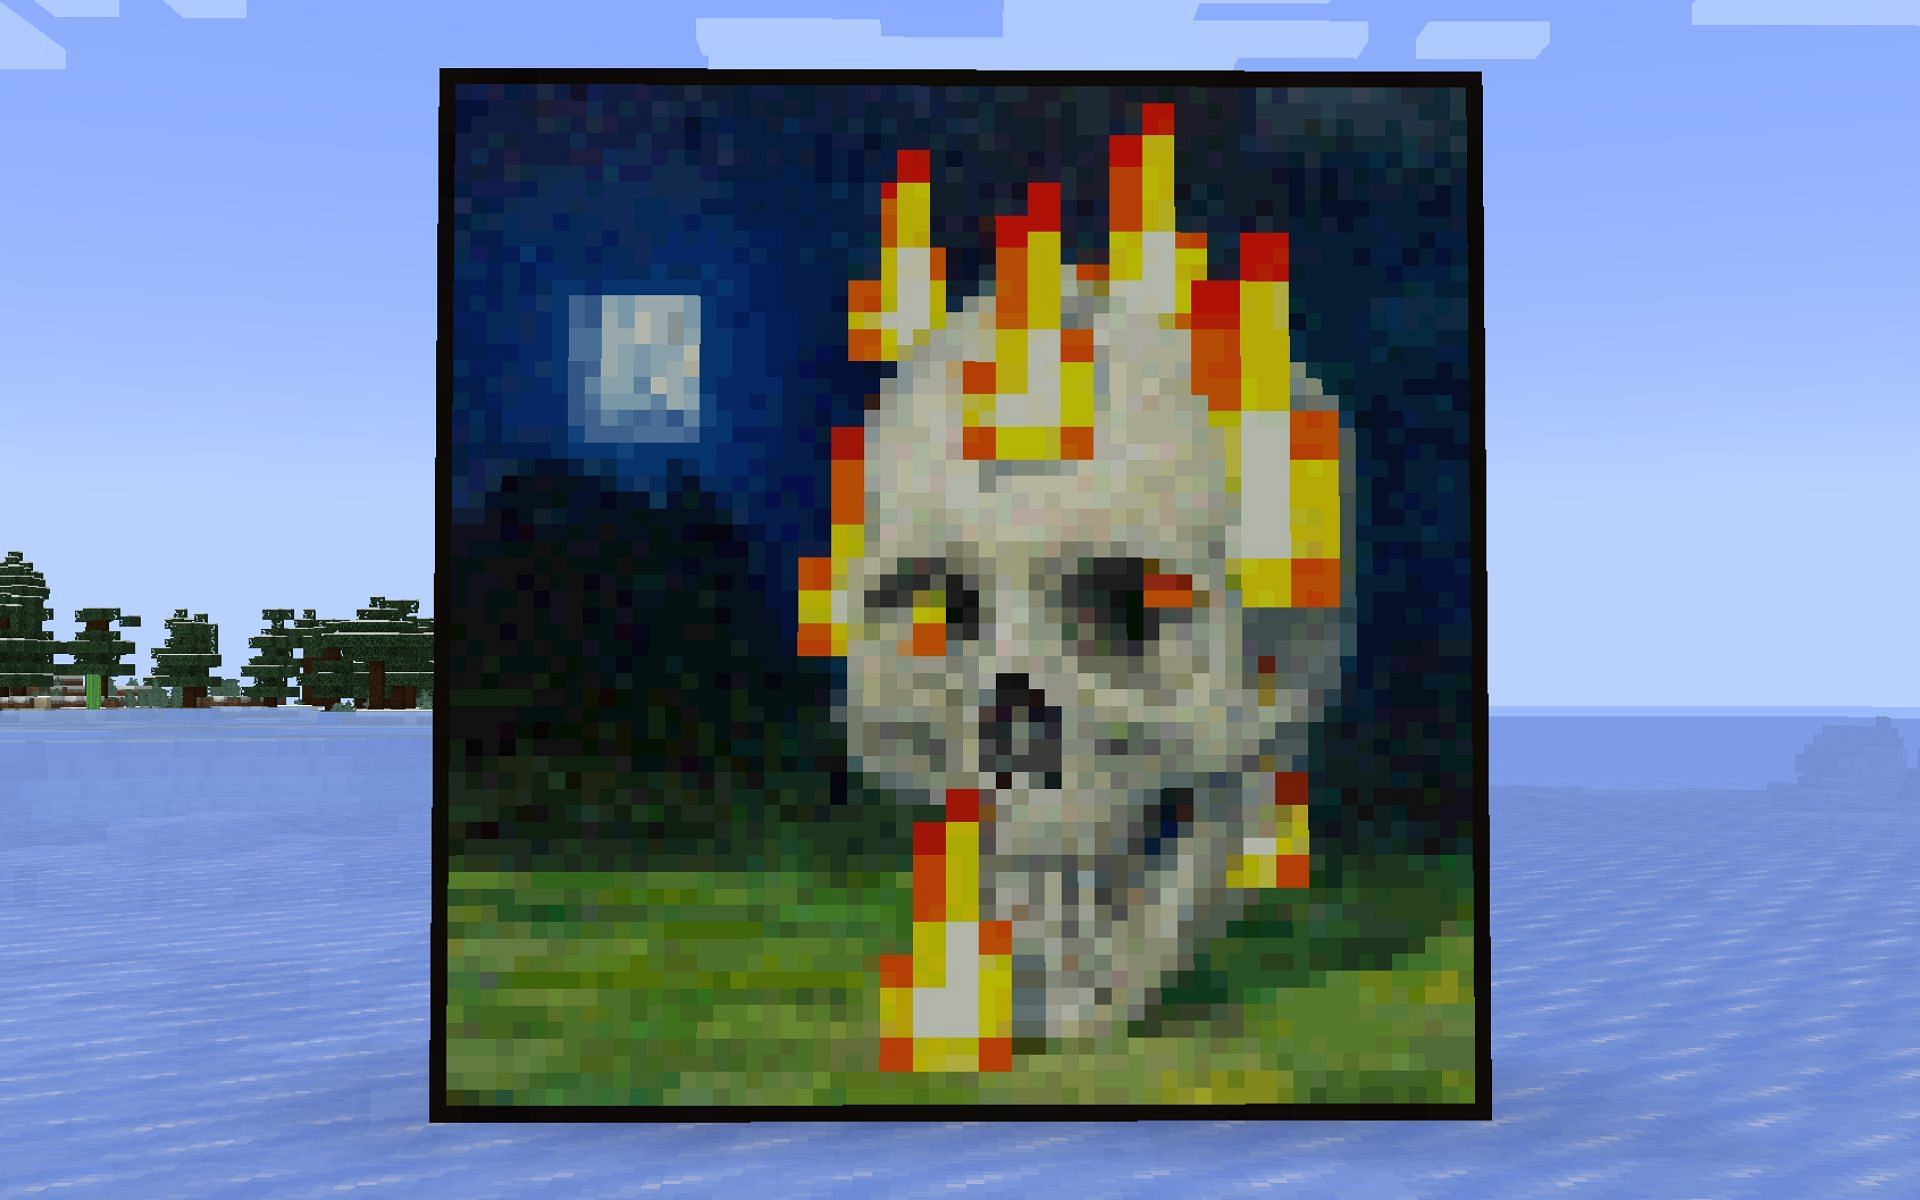 Minecraft Original Artist Of The Iconic Skull Painting Posts An Old Photo On Reddit